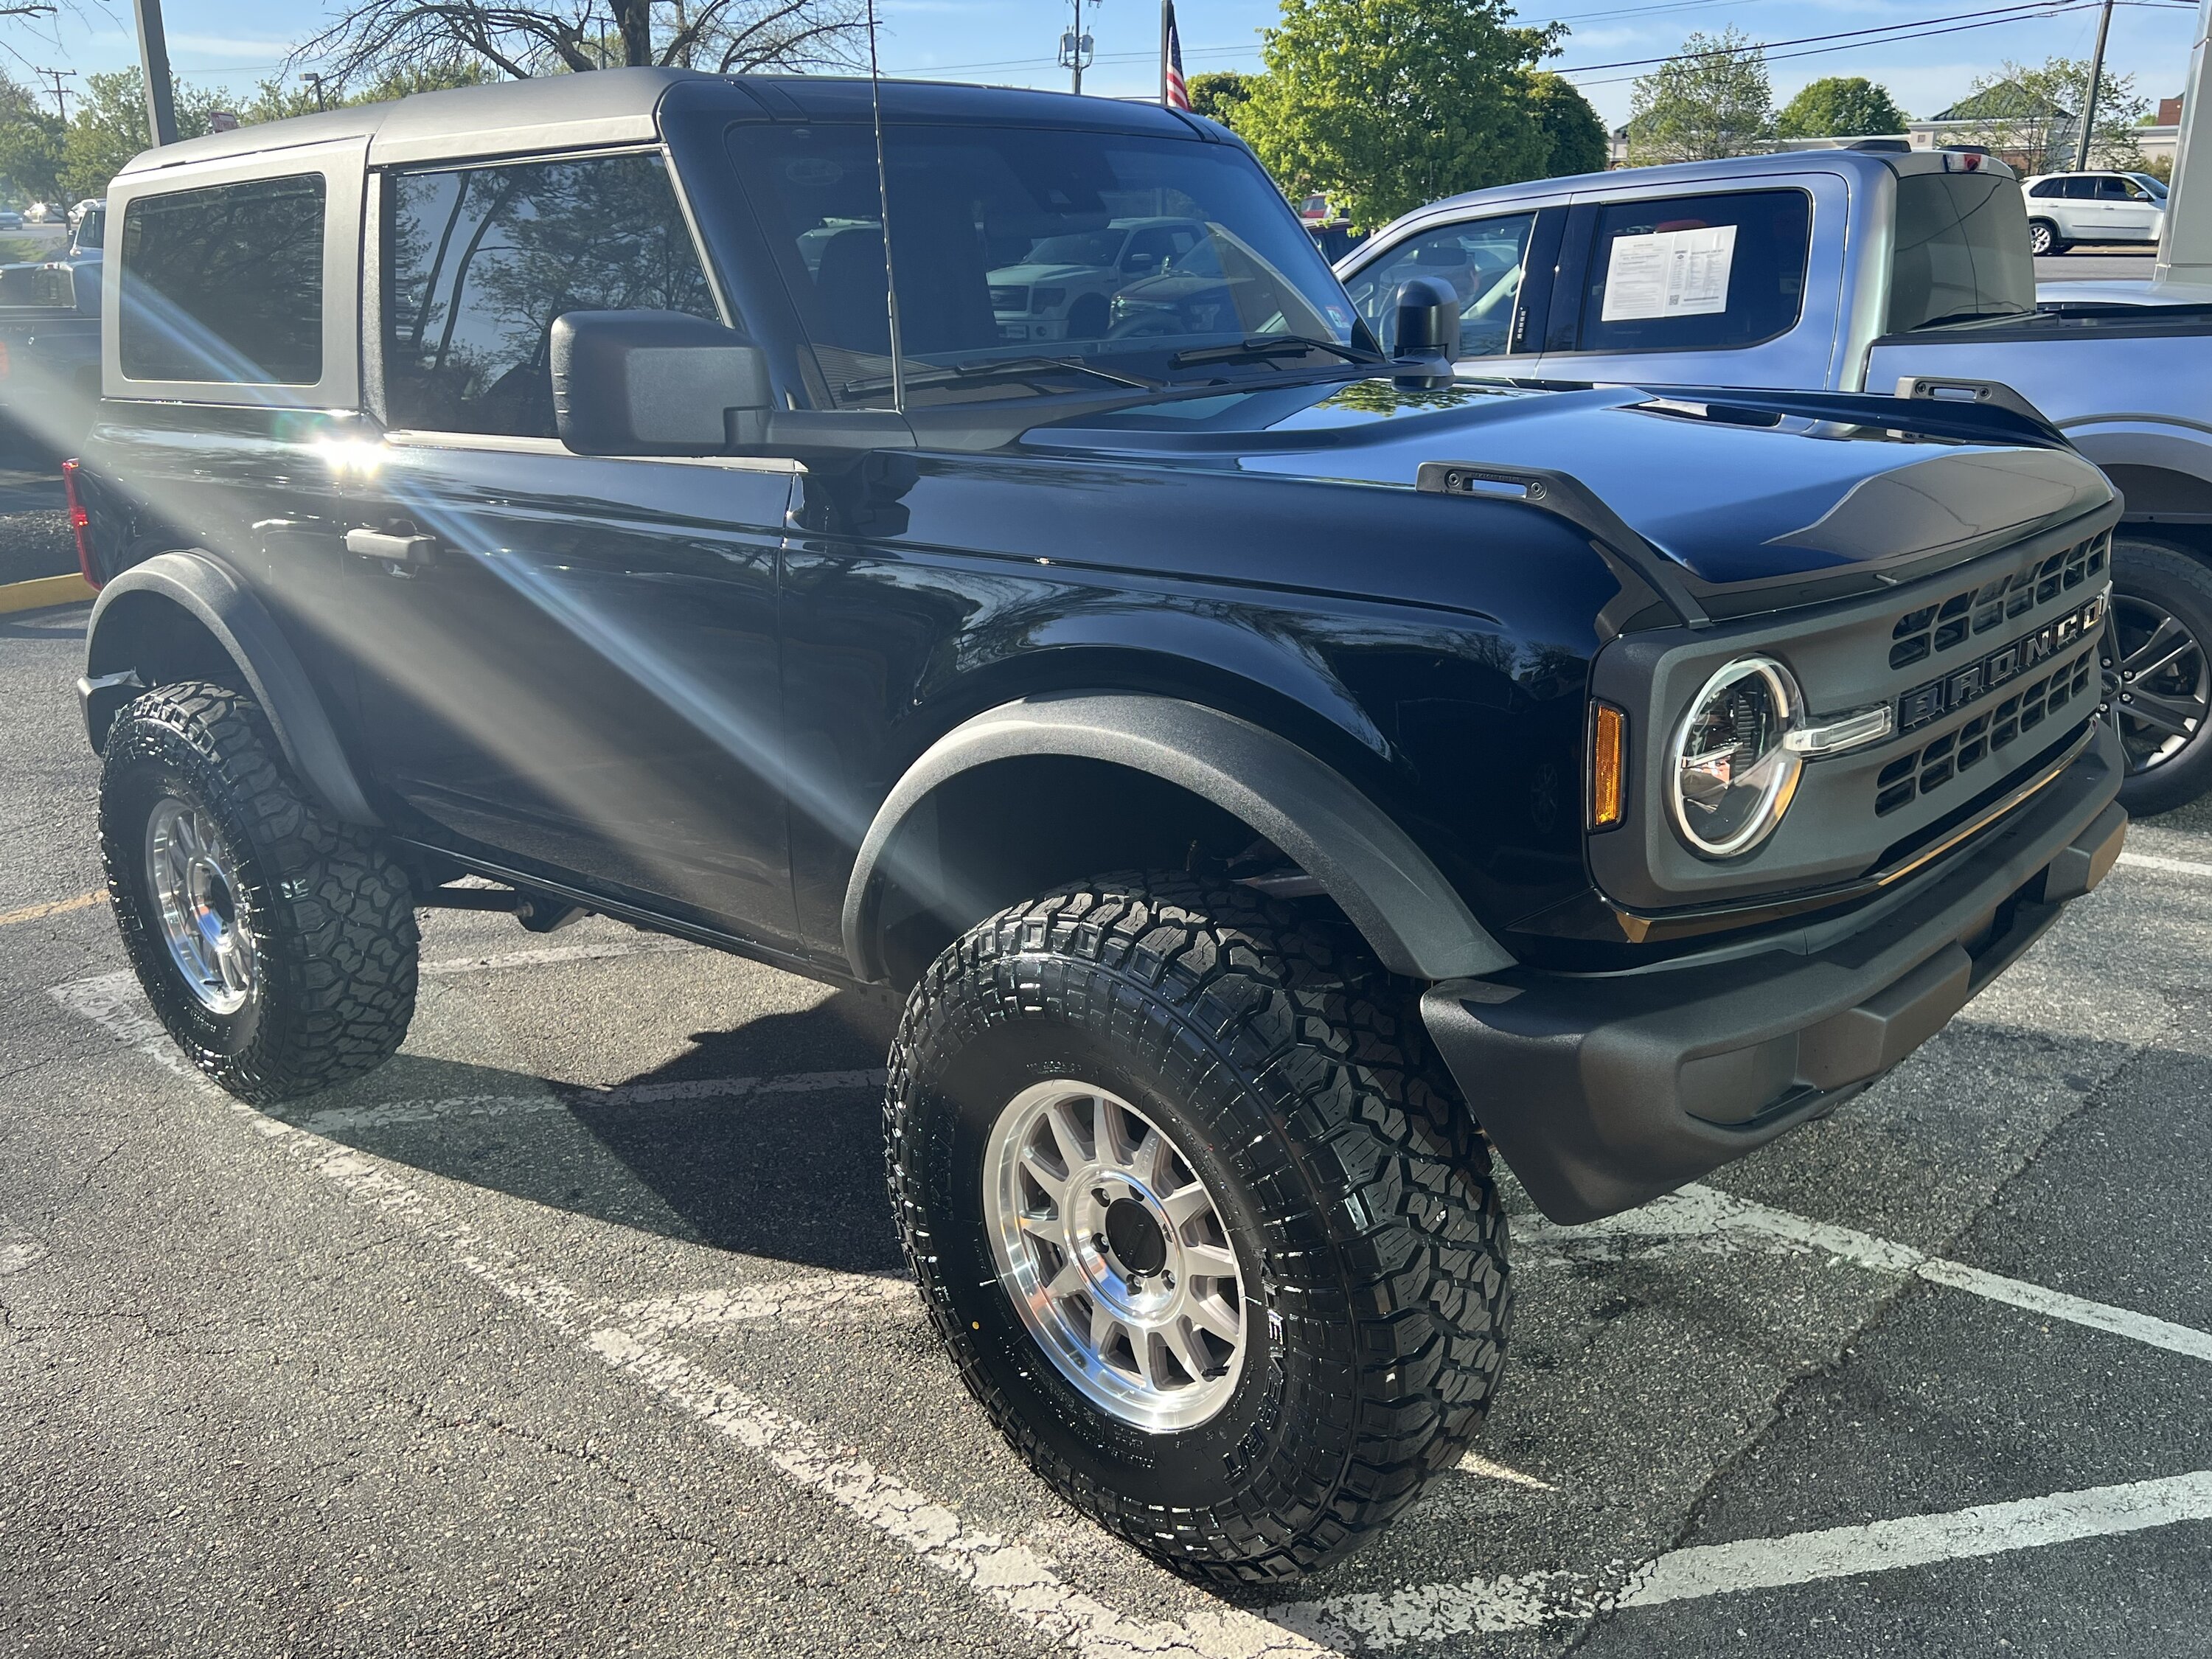 Ford Bronco Before & After (stock 2dr Base vs. 3.5” lift + 37’s). What a difference! IMG_3615